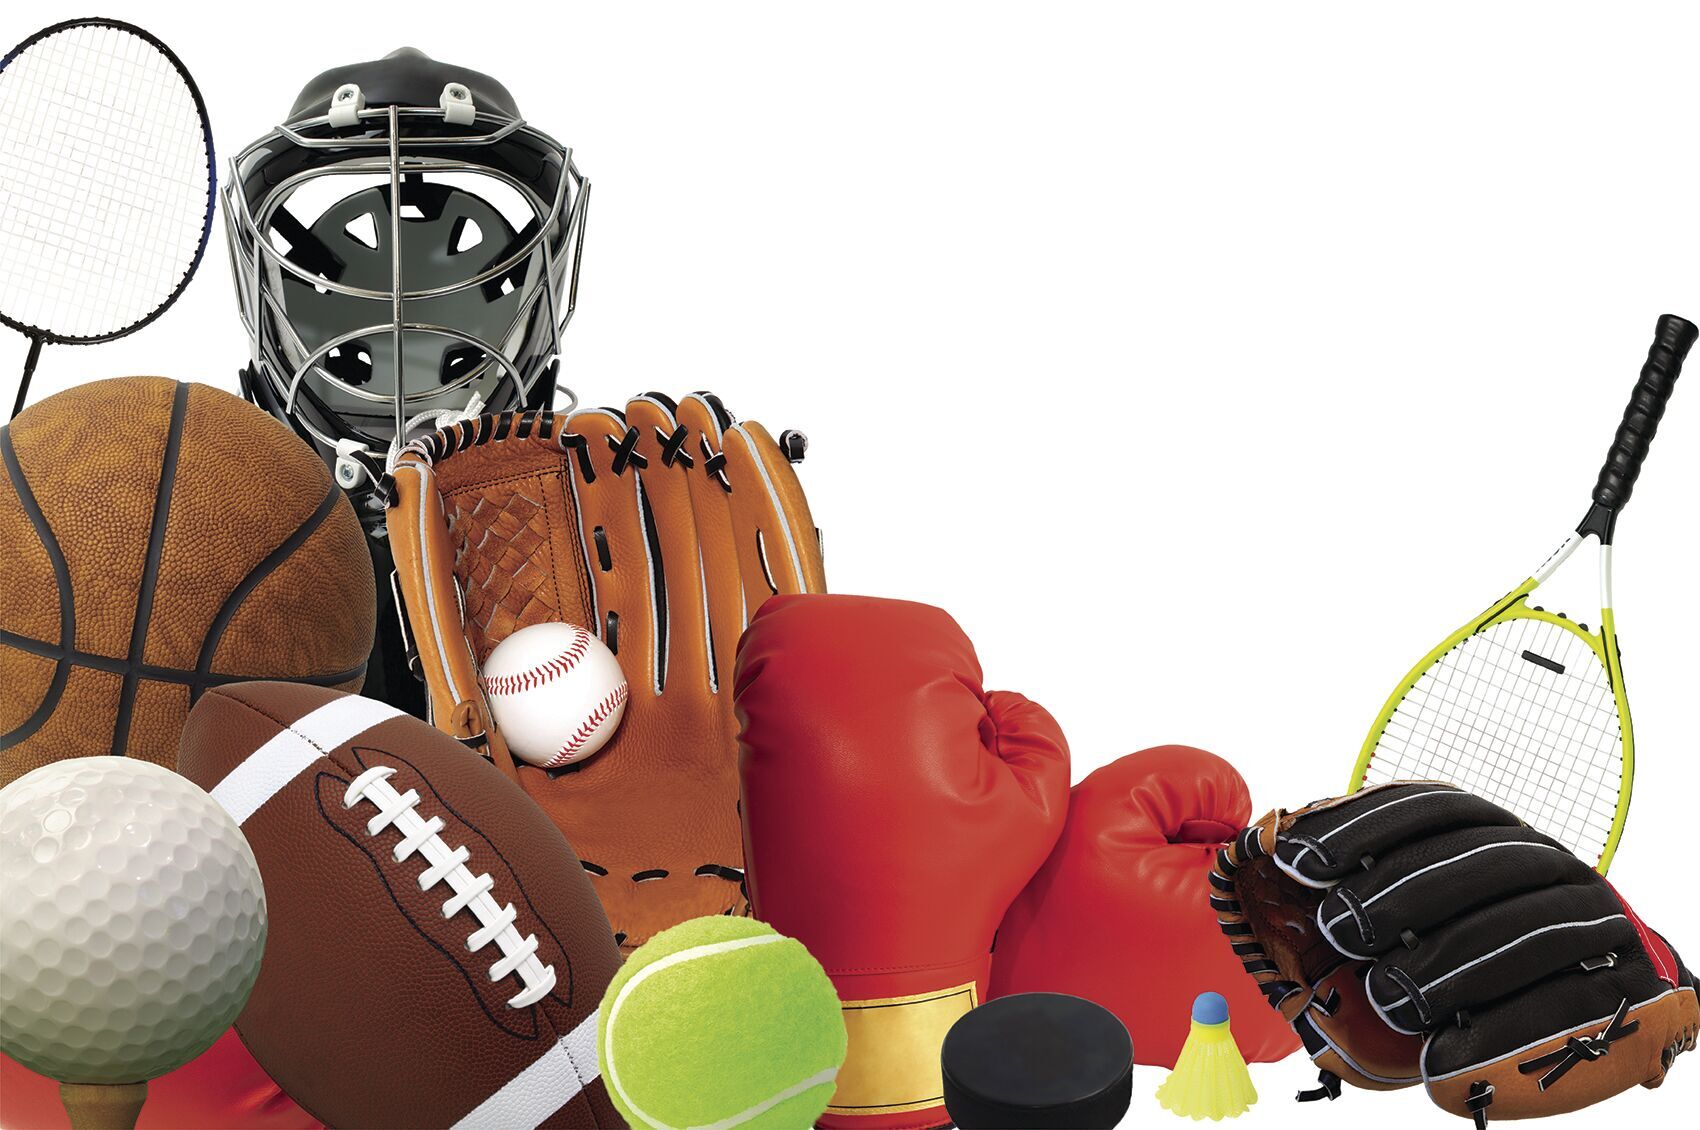 Upcoming High School Sports Schedule for Tennis, Soccer, Softball, Baseball, Lacrosse